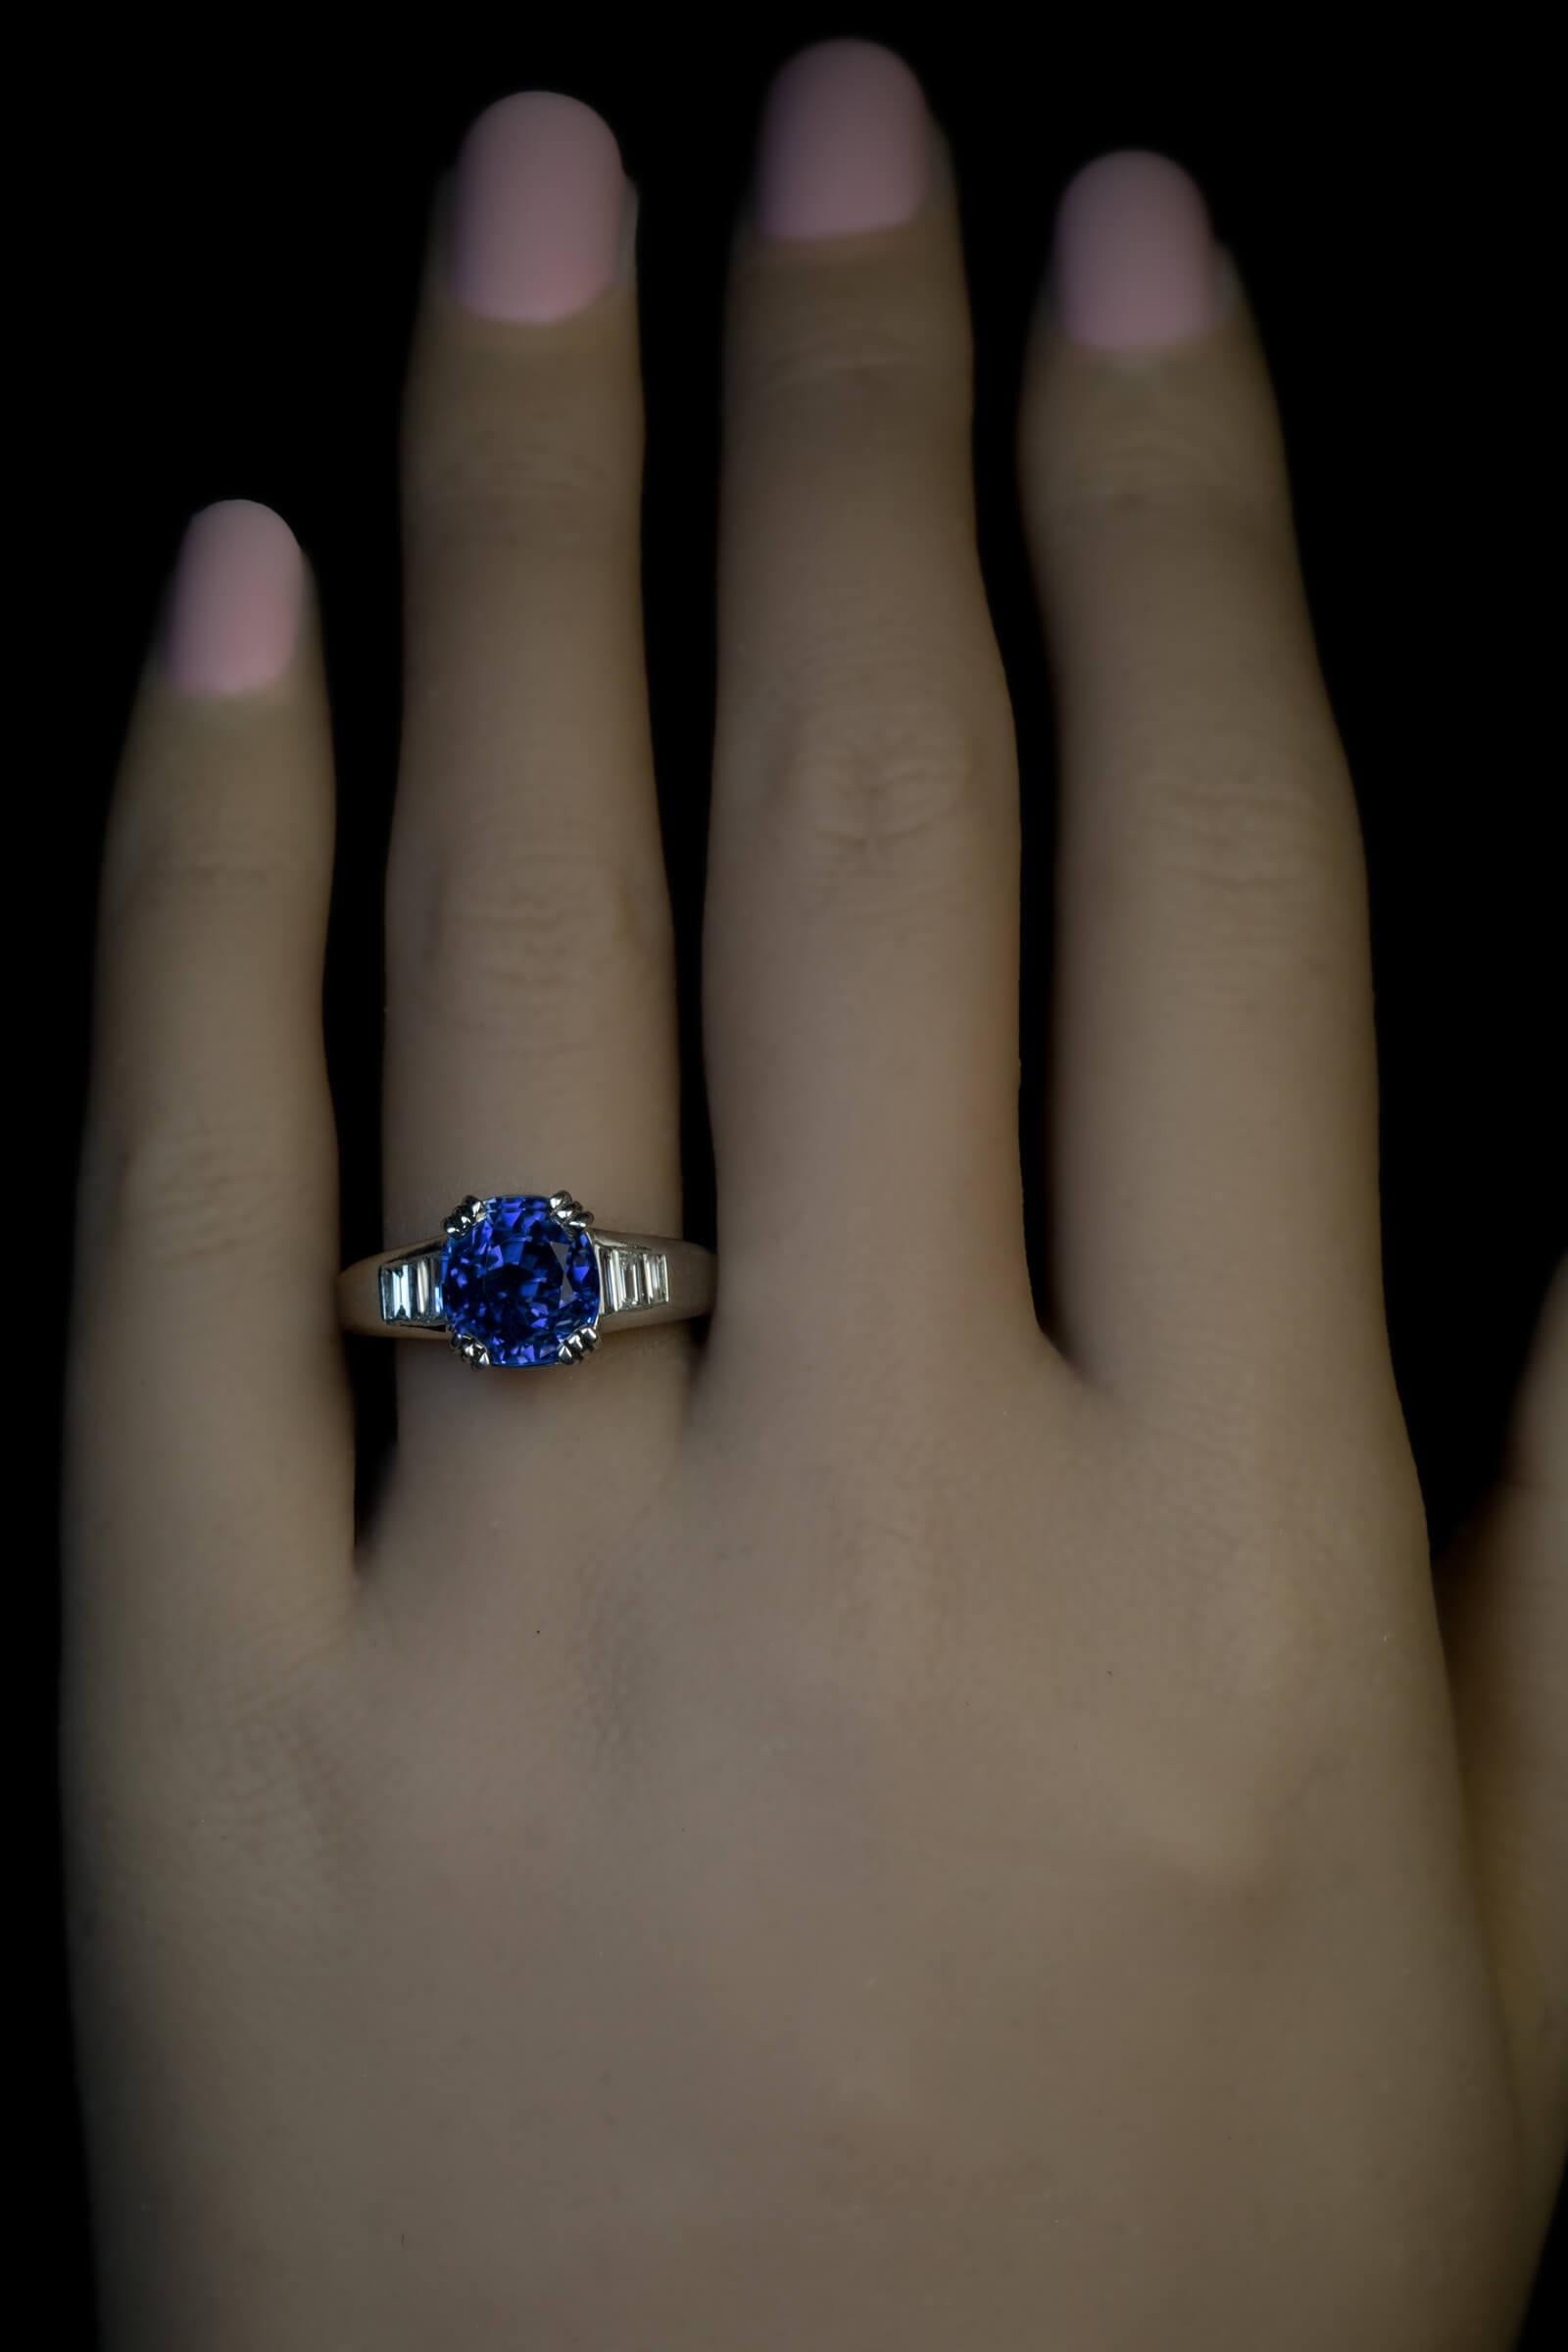 Originally, this 5.06 ct natural unheated Ceylon sapphire was set in an Art Deco era vintage ring. The sapphire is an old mine cut stone circa early 1900s. It was recently re-set into this modern custom made solid platinum ring. The sapphire is